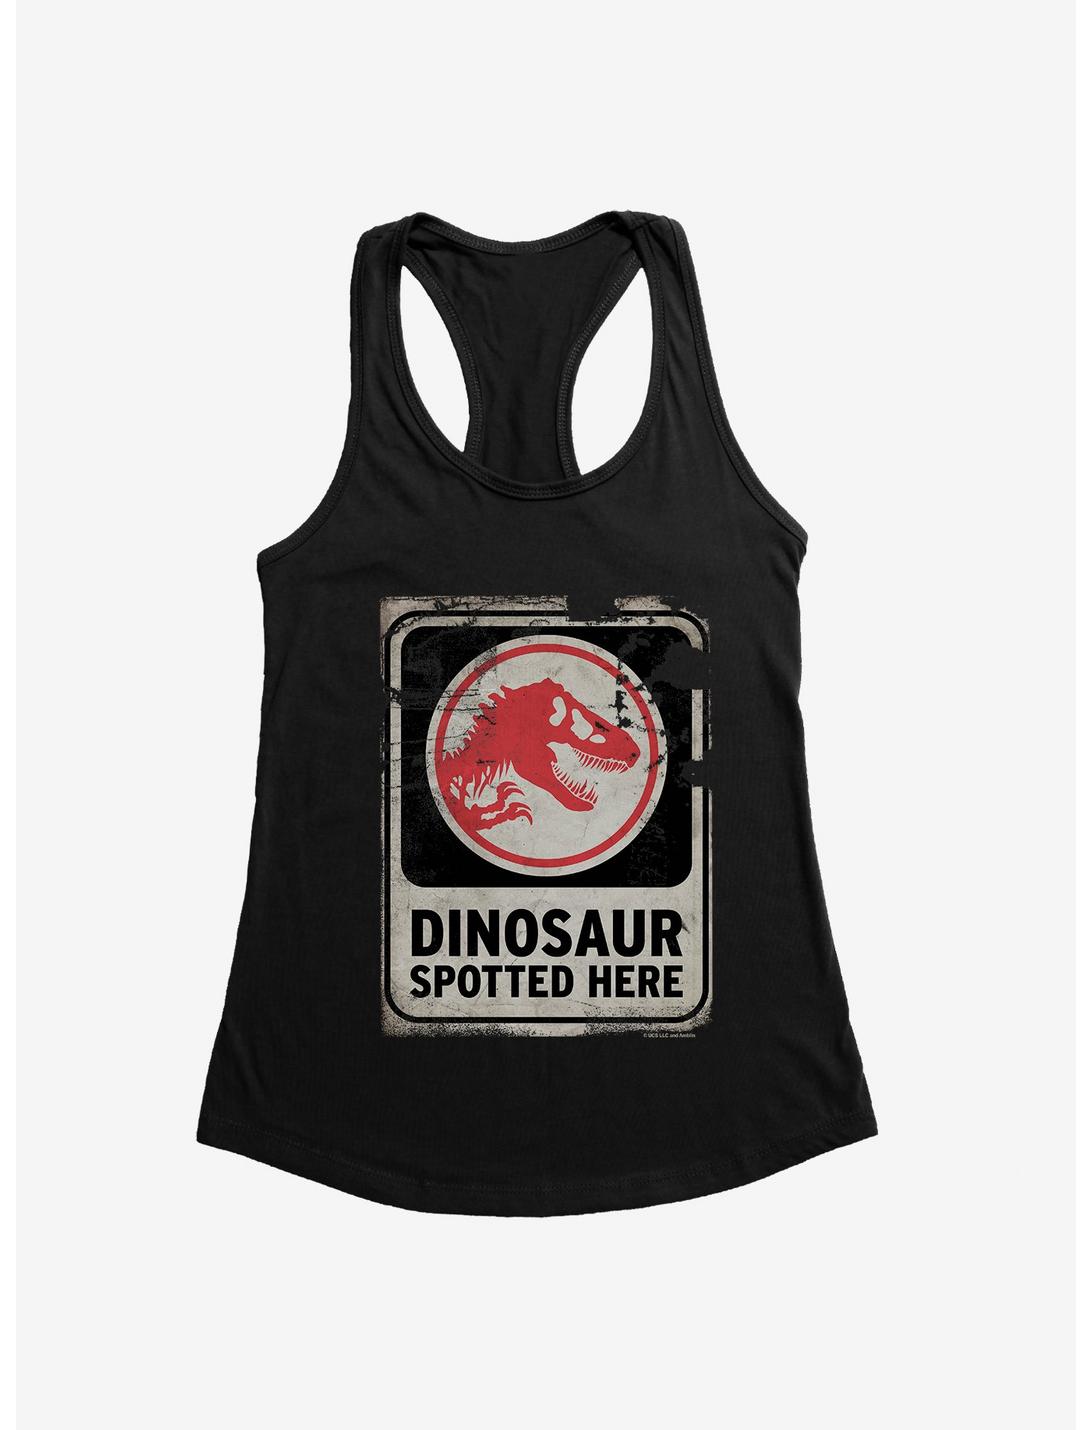 Jurassic World Dominion Dinosaur Spotted Here Womens Tank Top, , hi-res